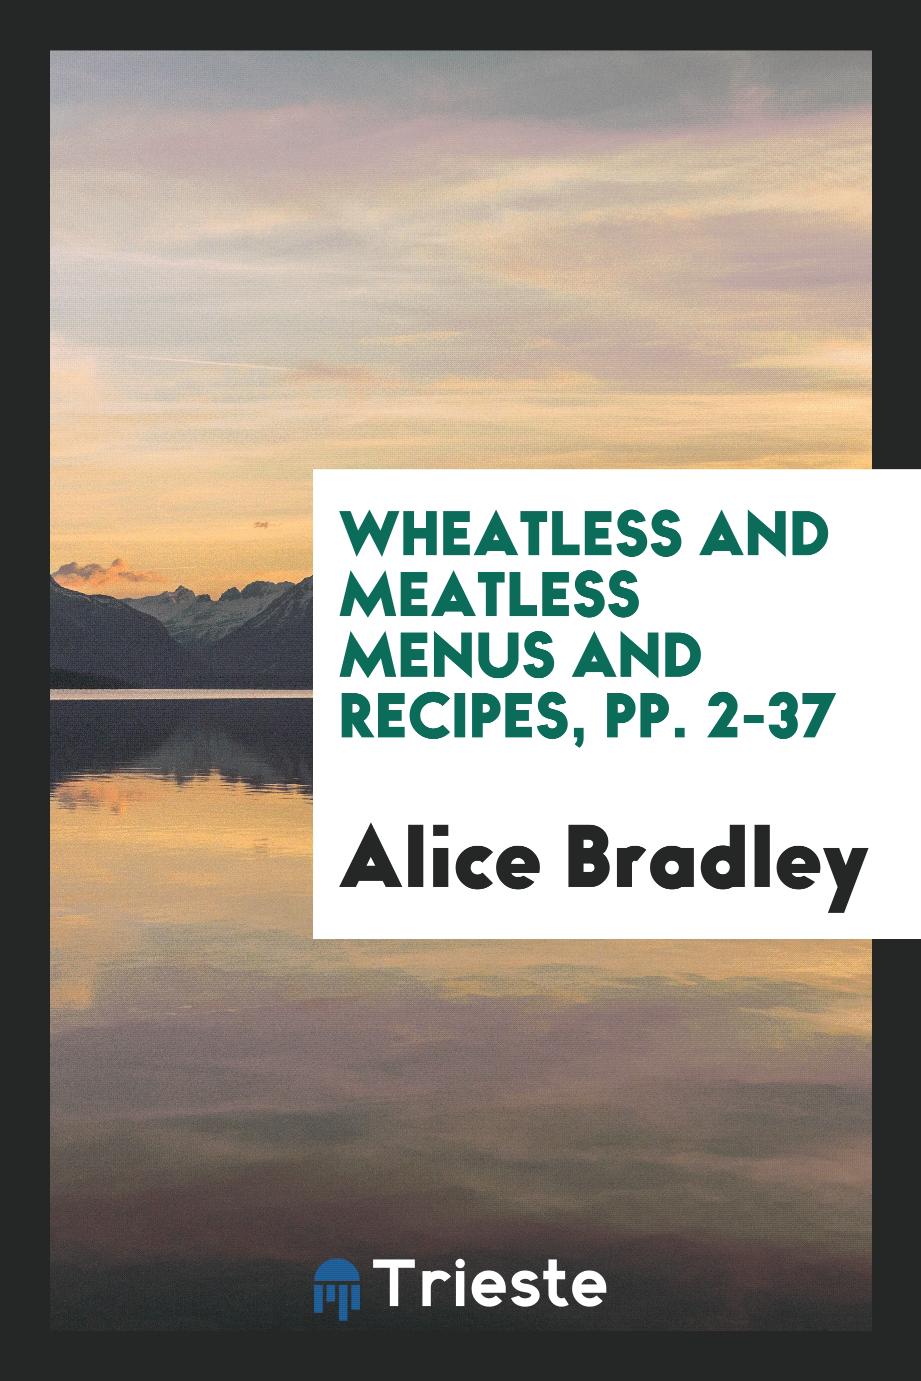 Wheatless and Meatless Menus and Recipes, pp. 2-37